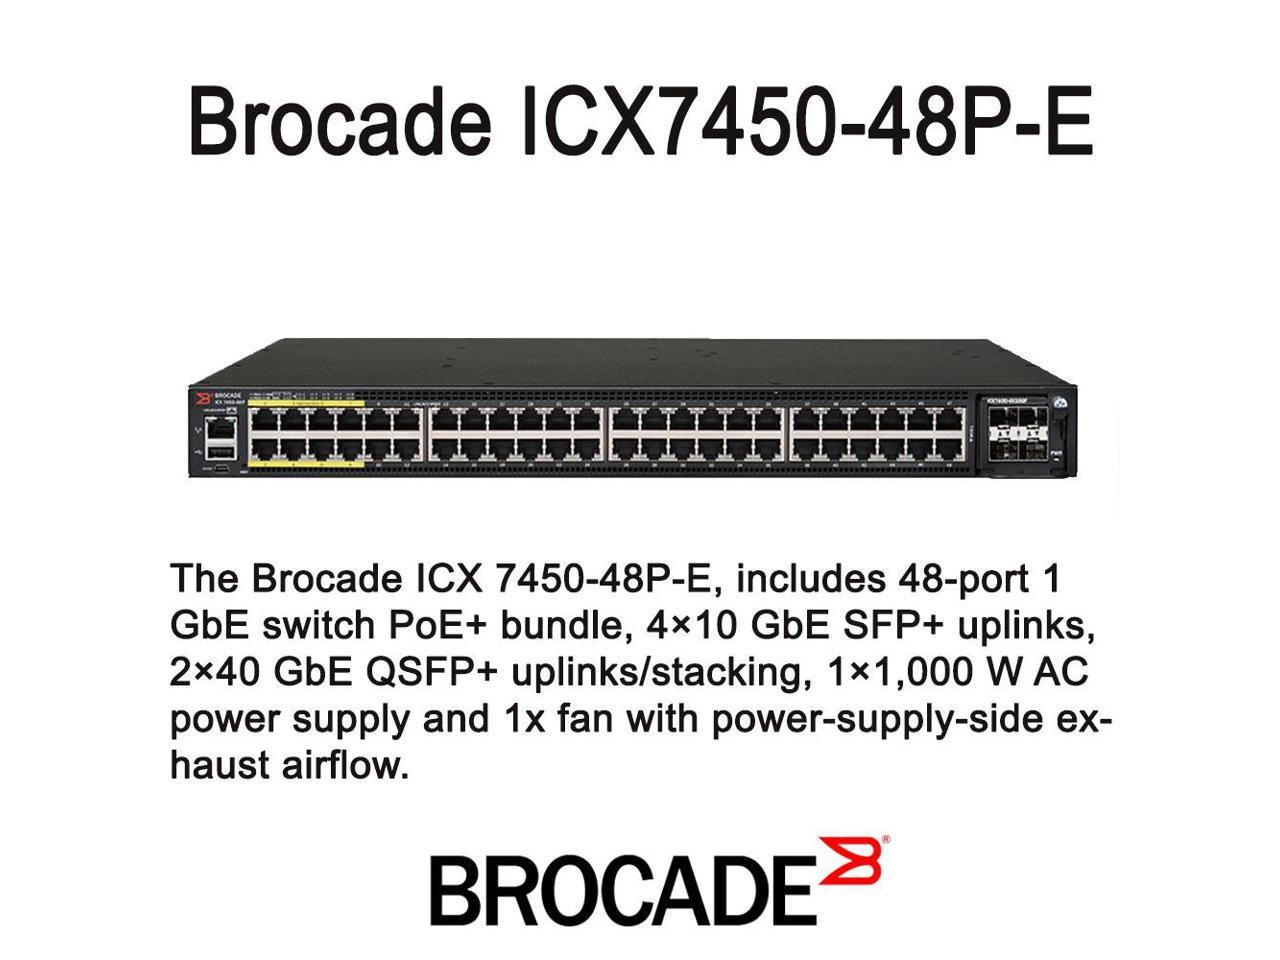 how large is the mac address table for a brocade icx7450